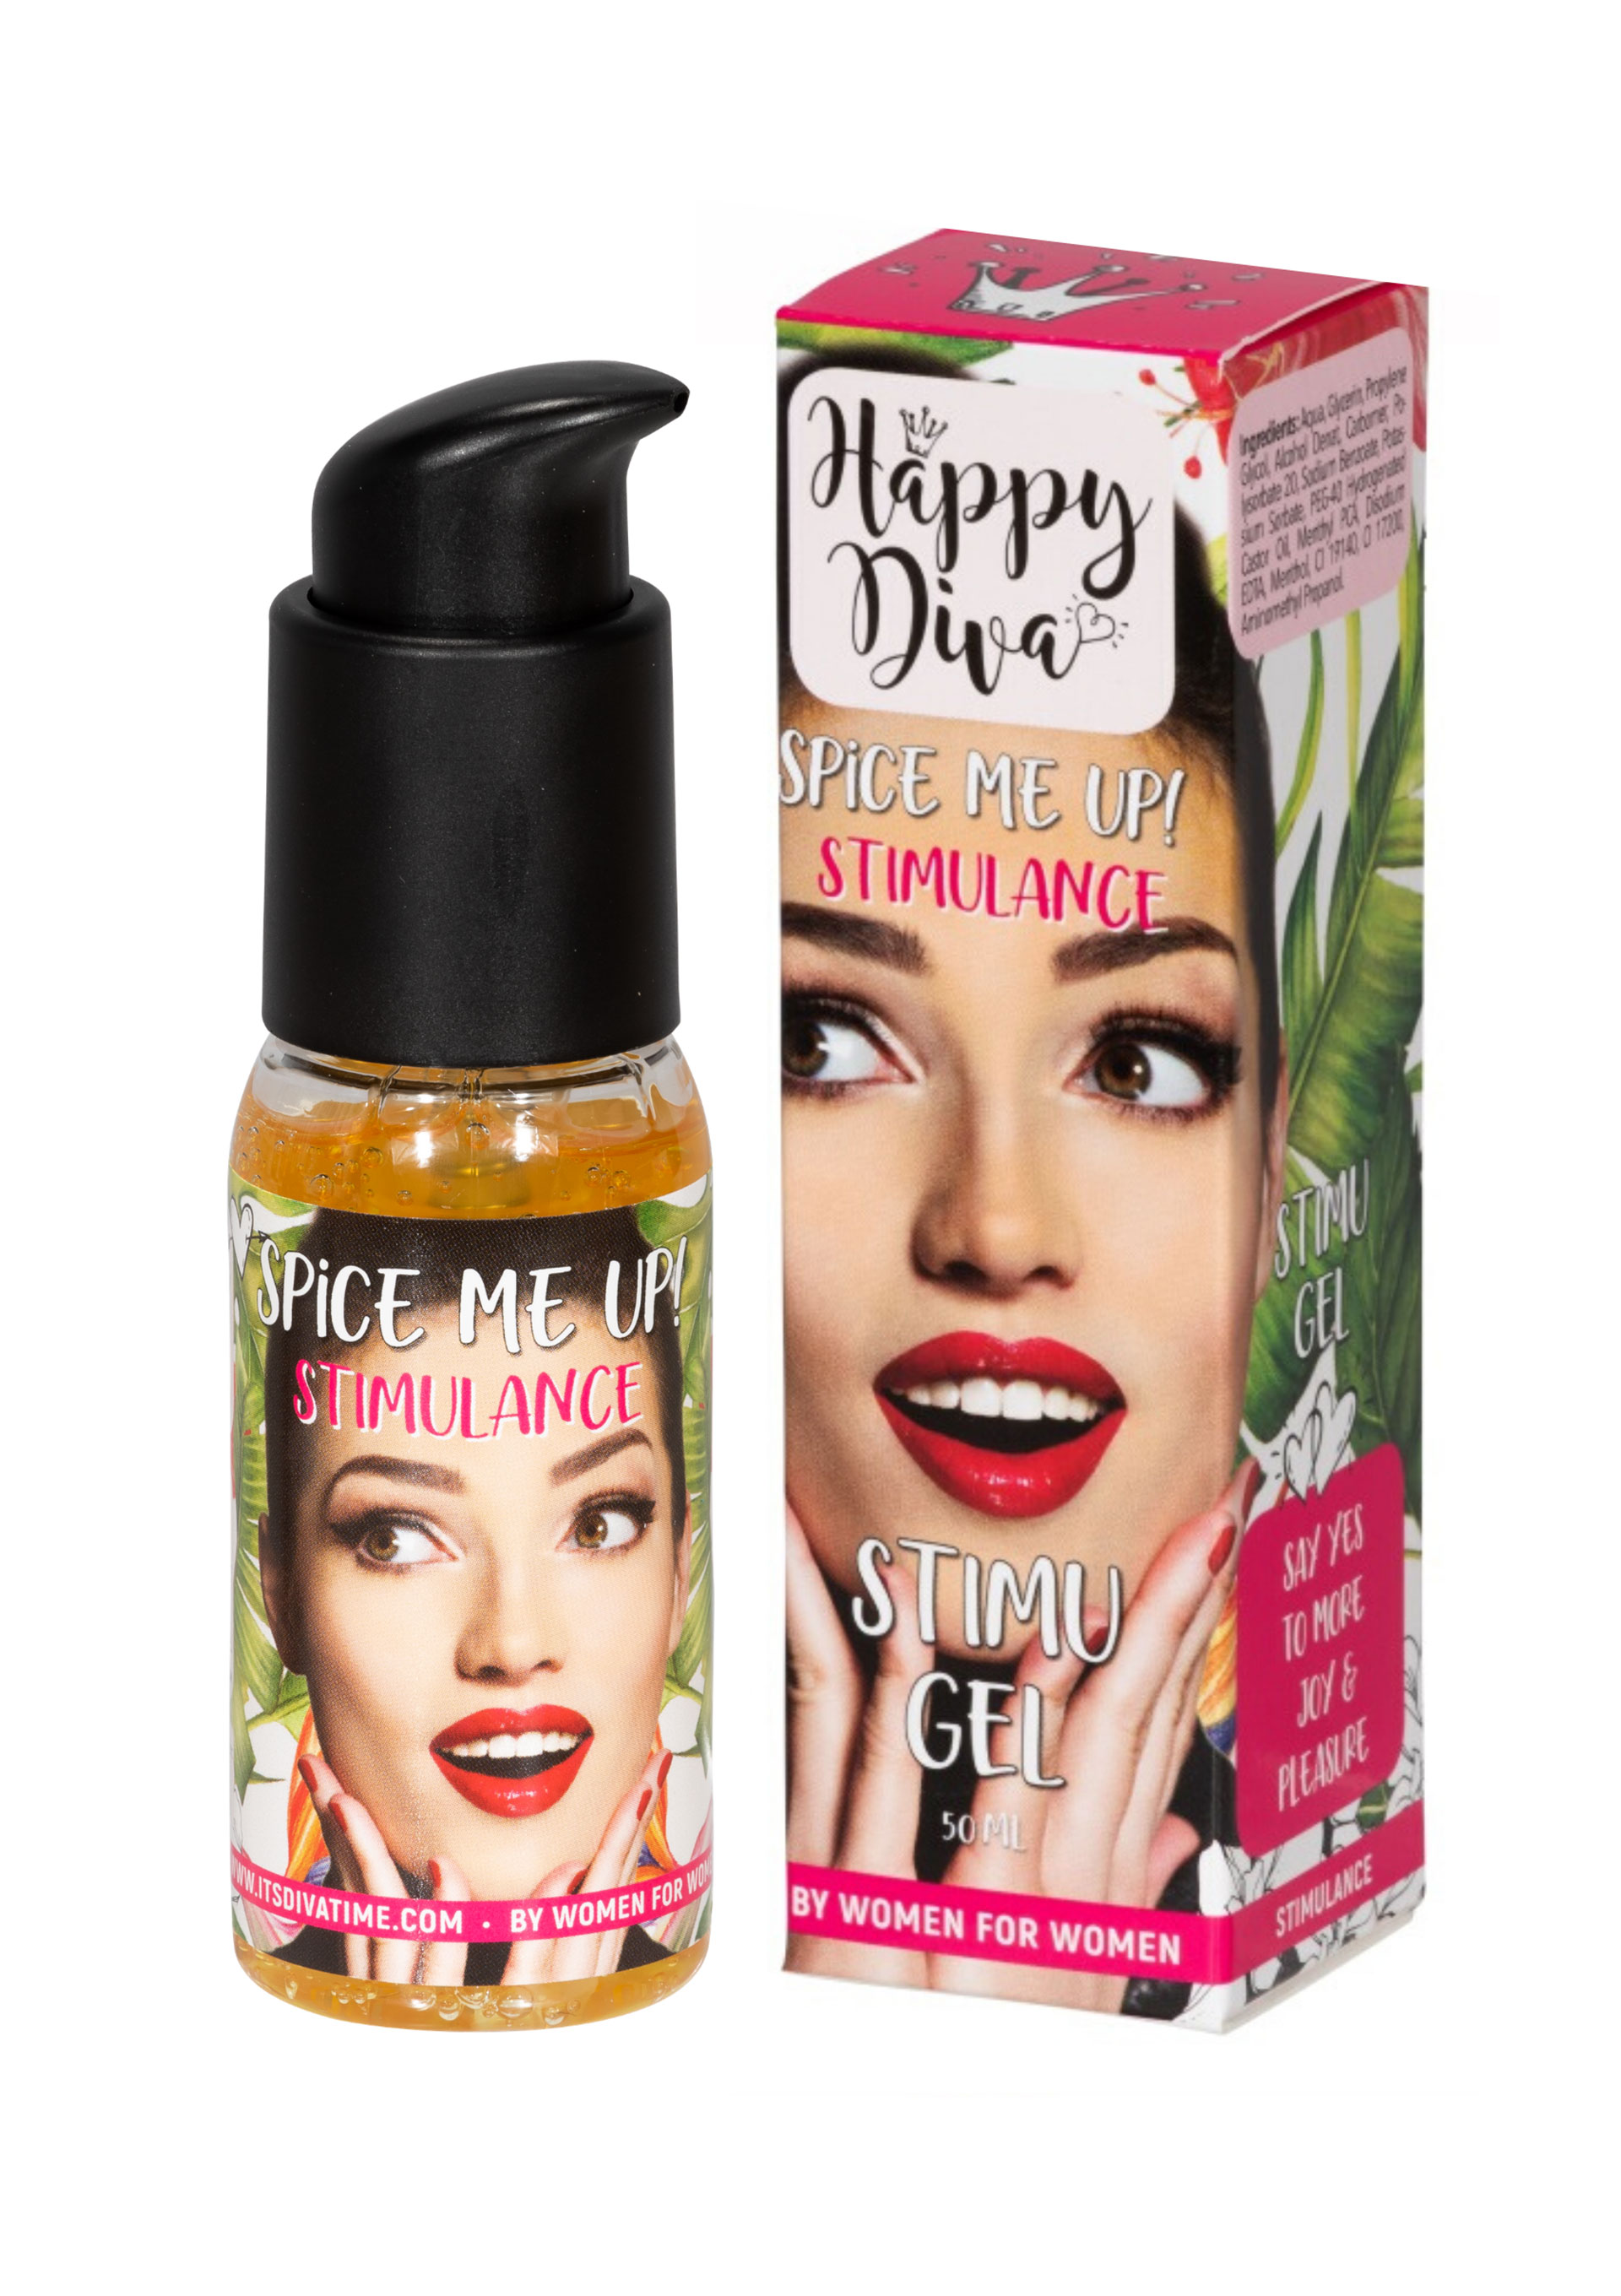 Spice Me Up Stimulate Gel. Tingling Feeling, 50ml